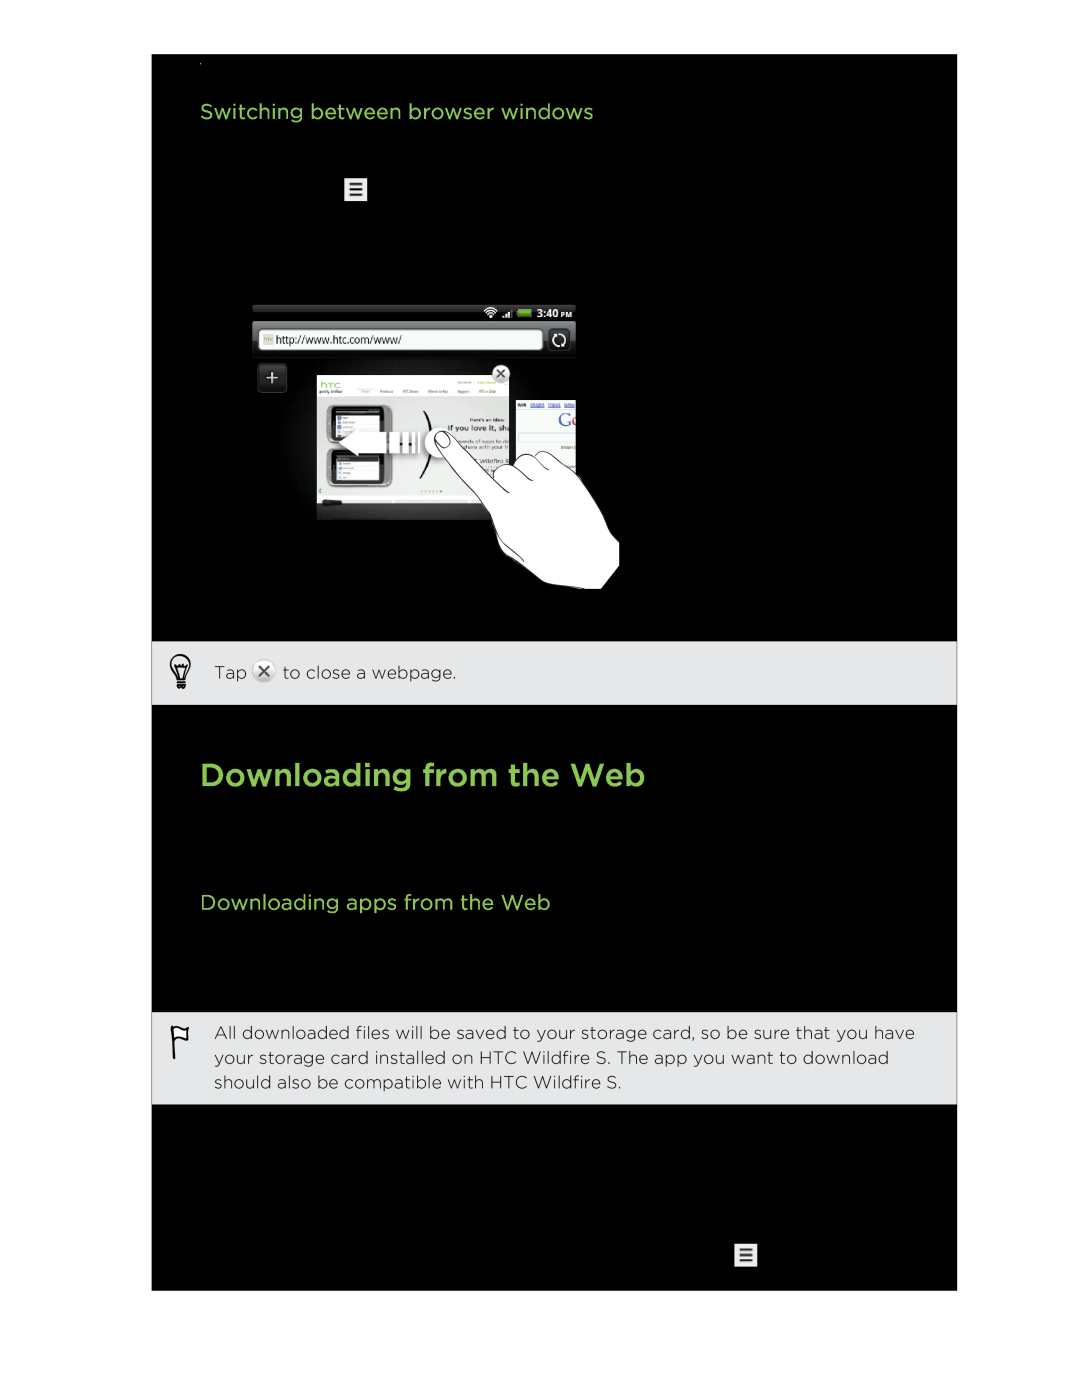 HTC manual Downloading from the Web, Switching between browser windows, Downloading apps from the Web 